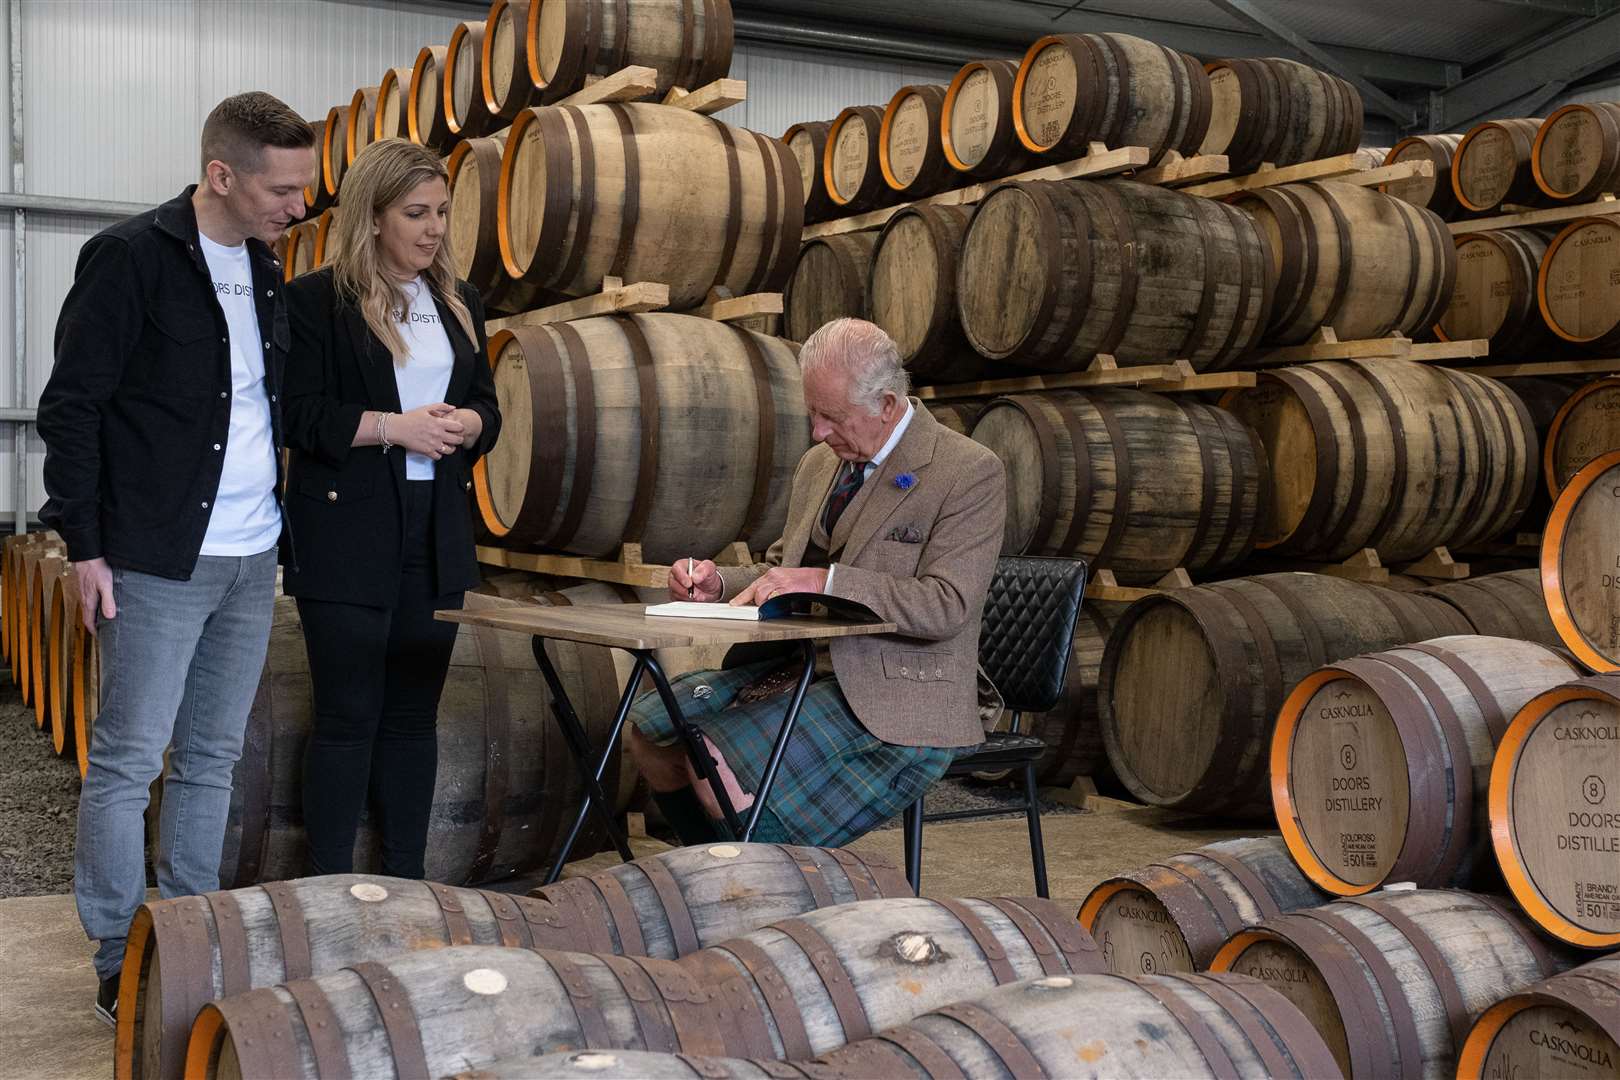 The King signing the visitors' book in the warehouse at 8 Doors Distillery this summer. Picture: Susie Mackenzie